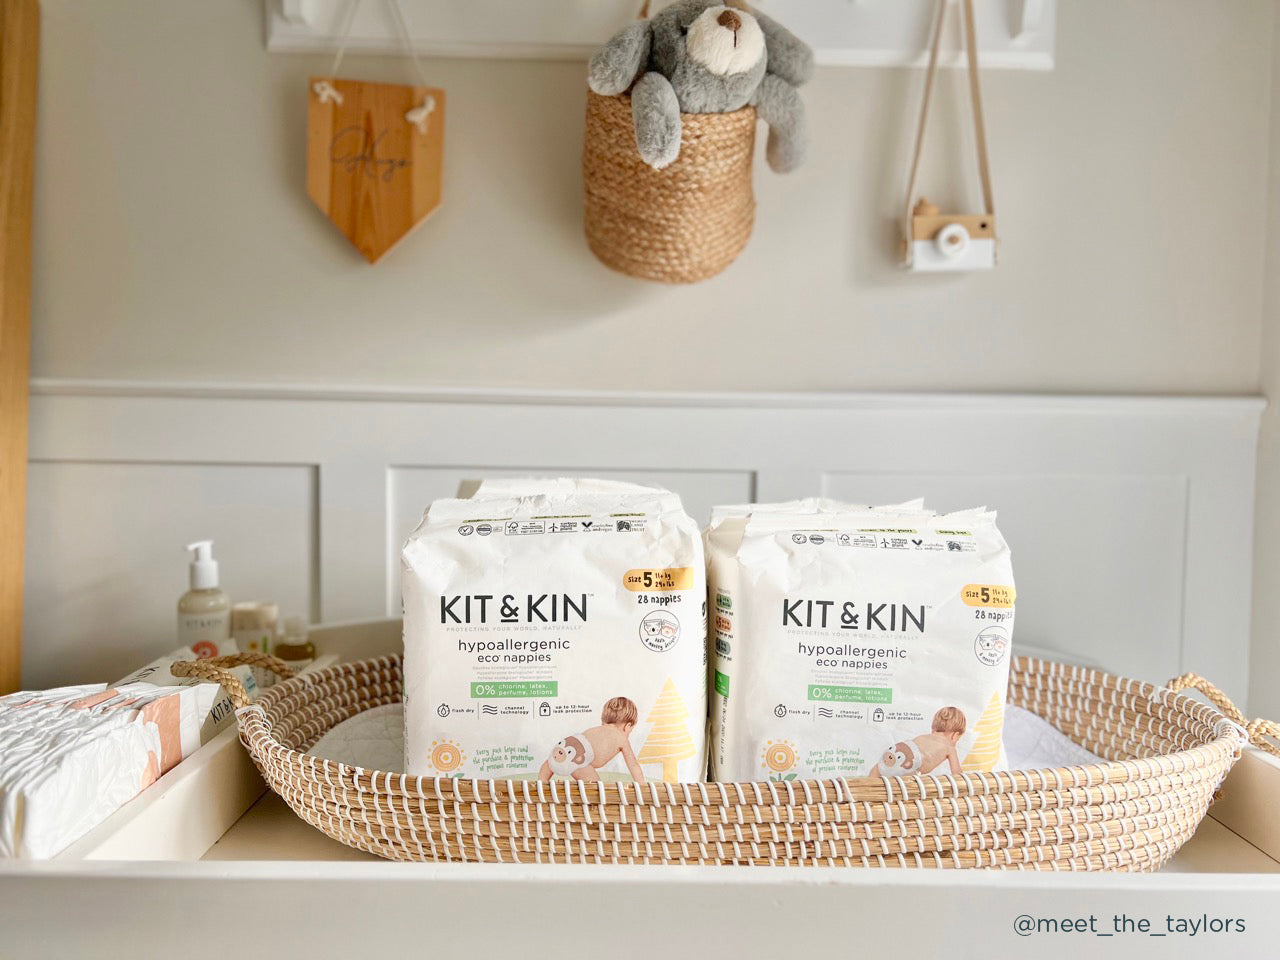 Kit & Kin size 5 eco nappies in paper packaging on changing table